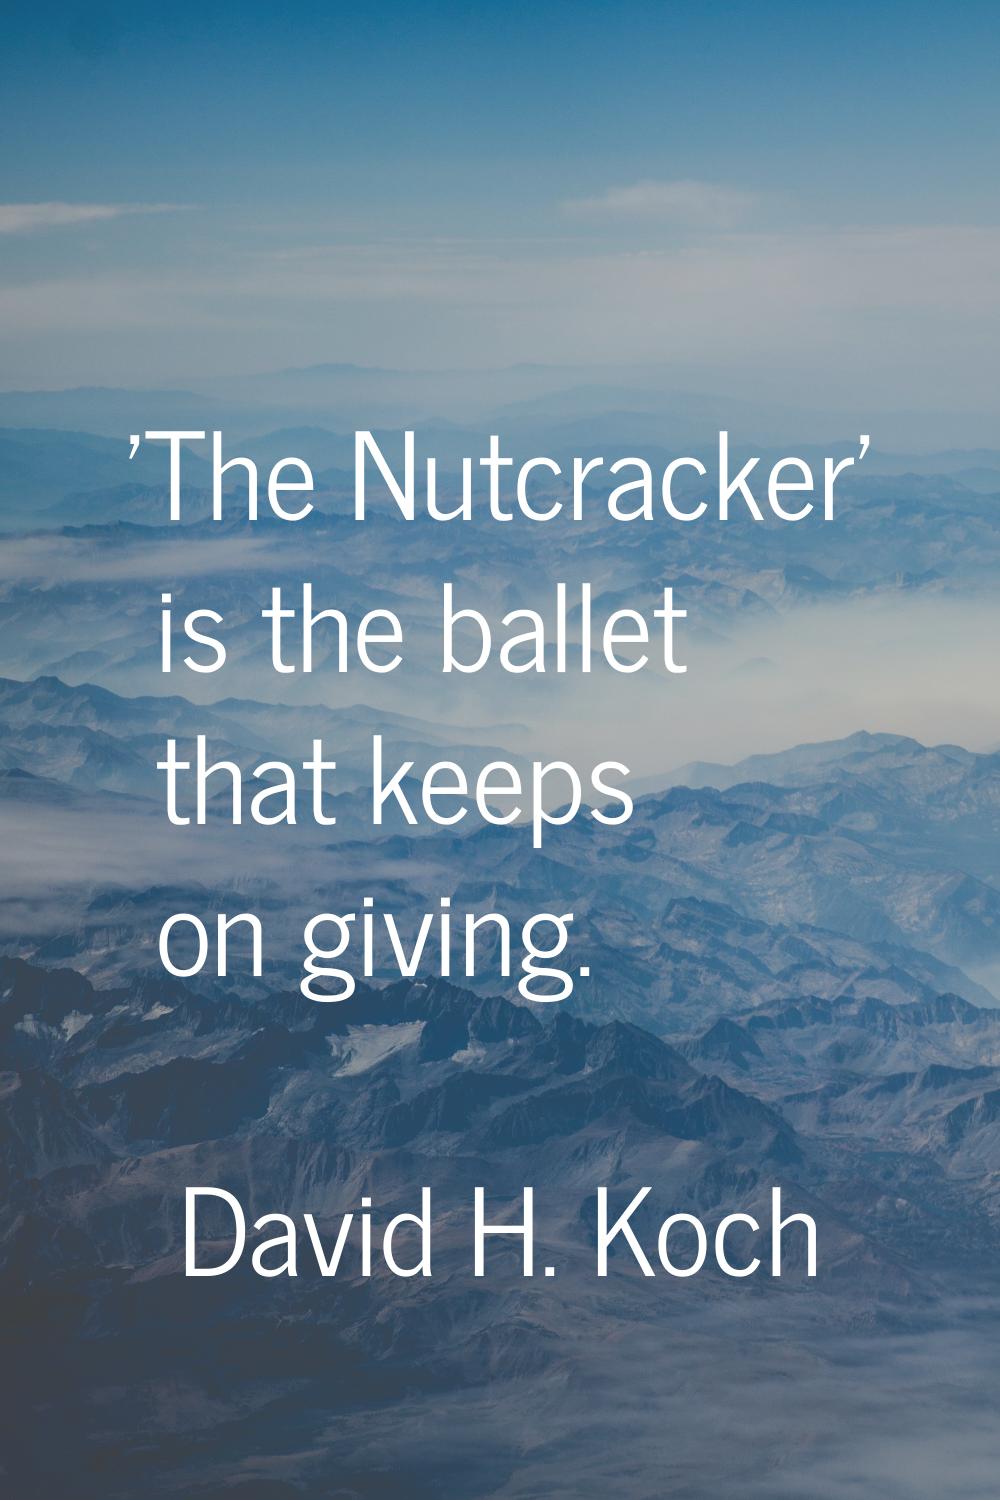 'The Nutcracker' is the ballet that keeps on giving.